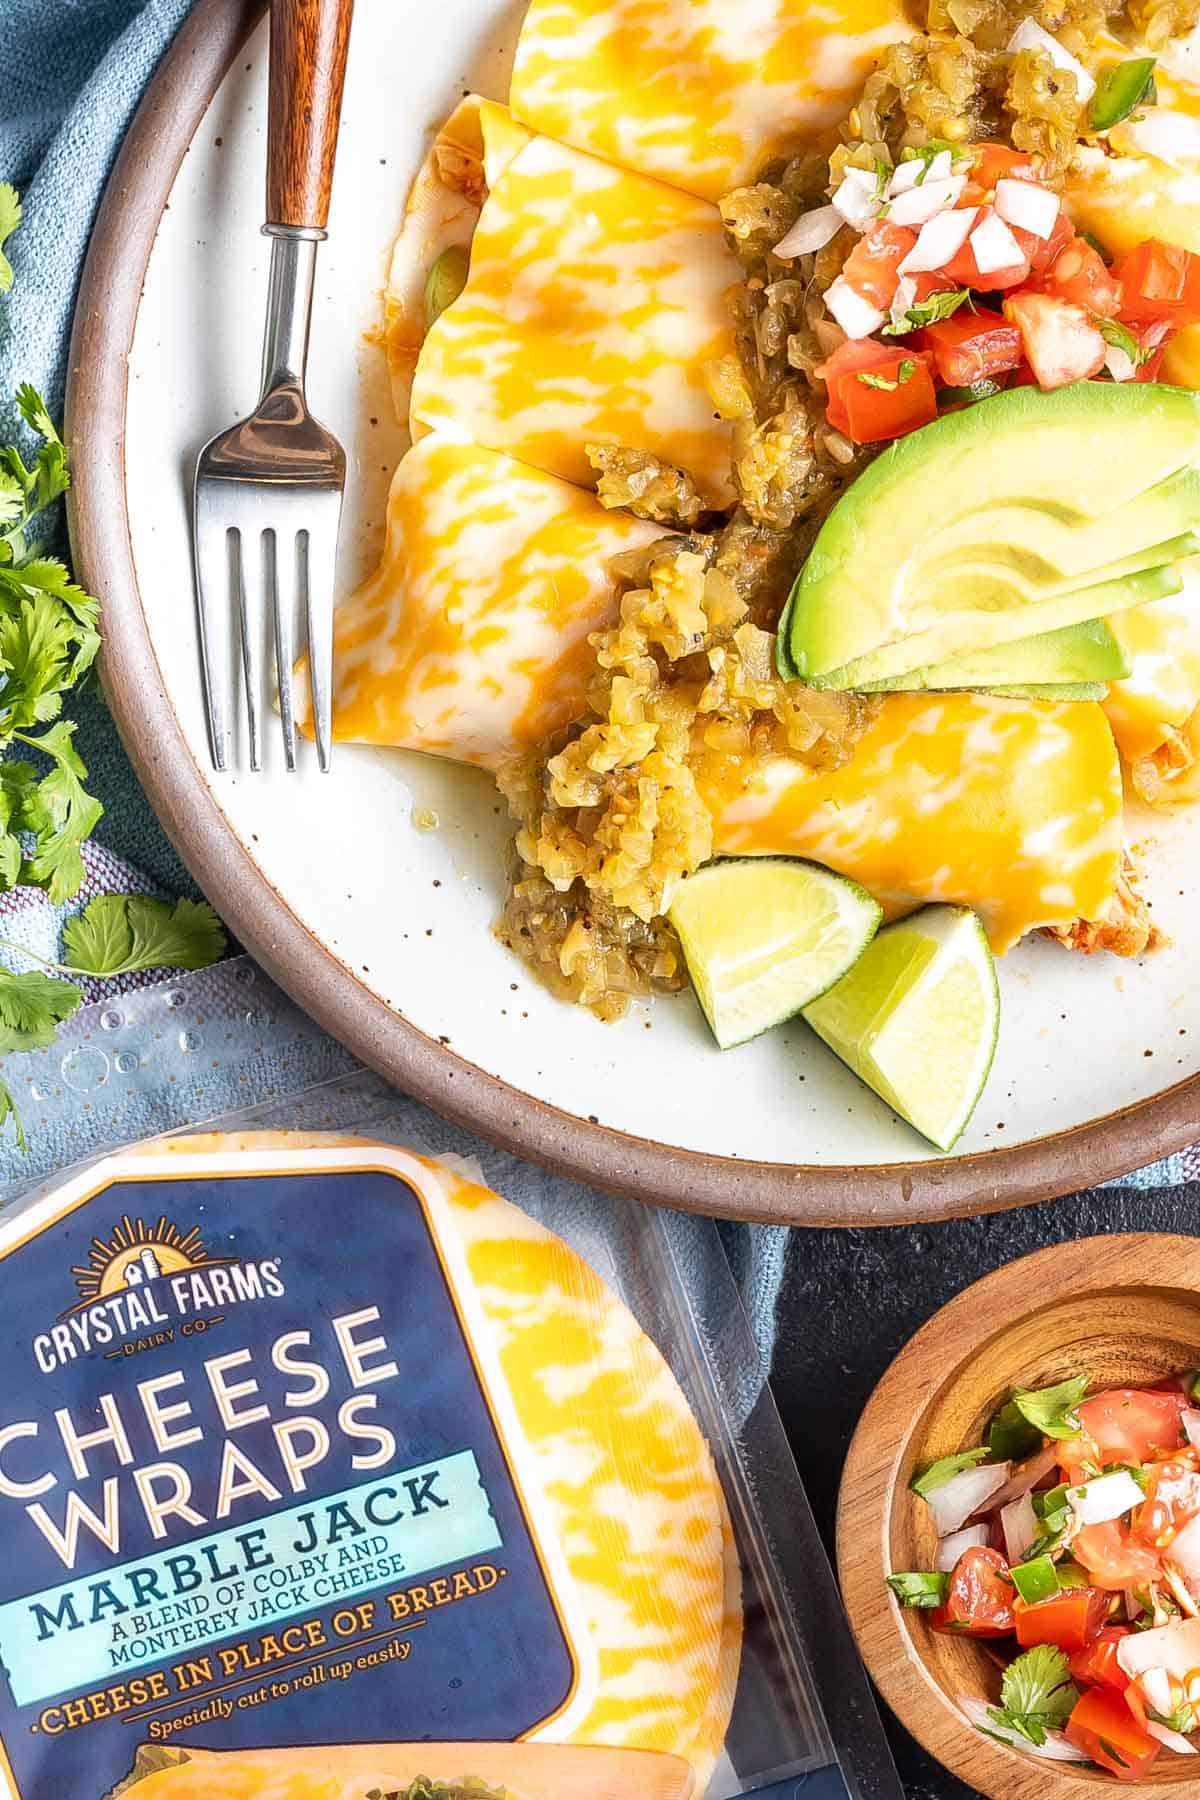 Keto Cheese Wrap Enchiladas on a plate topped with sliced avocado, pico de gallo, and limes. There is a package of Crystal Farms Cheese Wraps in the bottom lefthand corner.